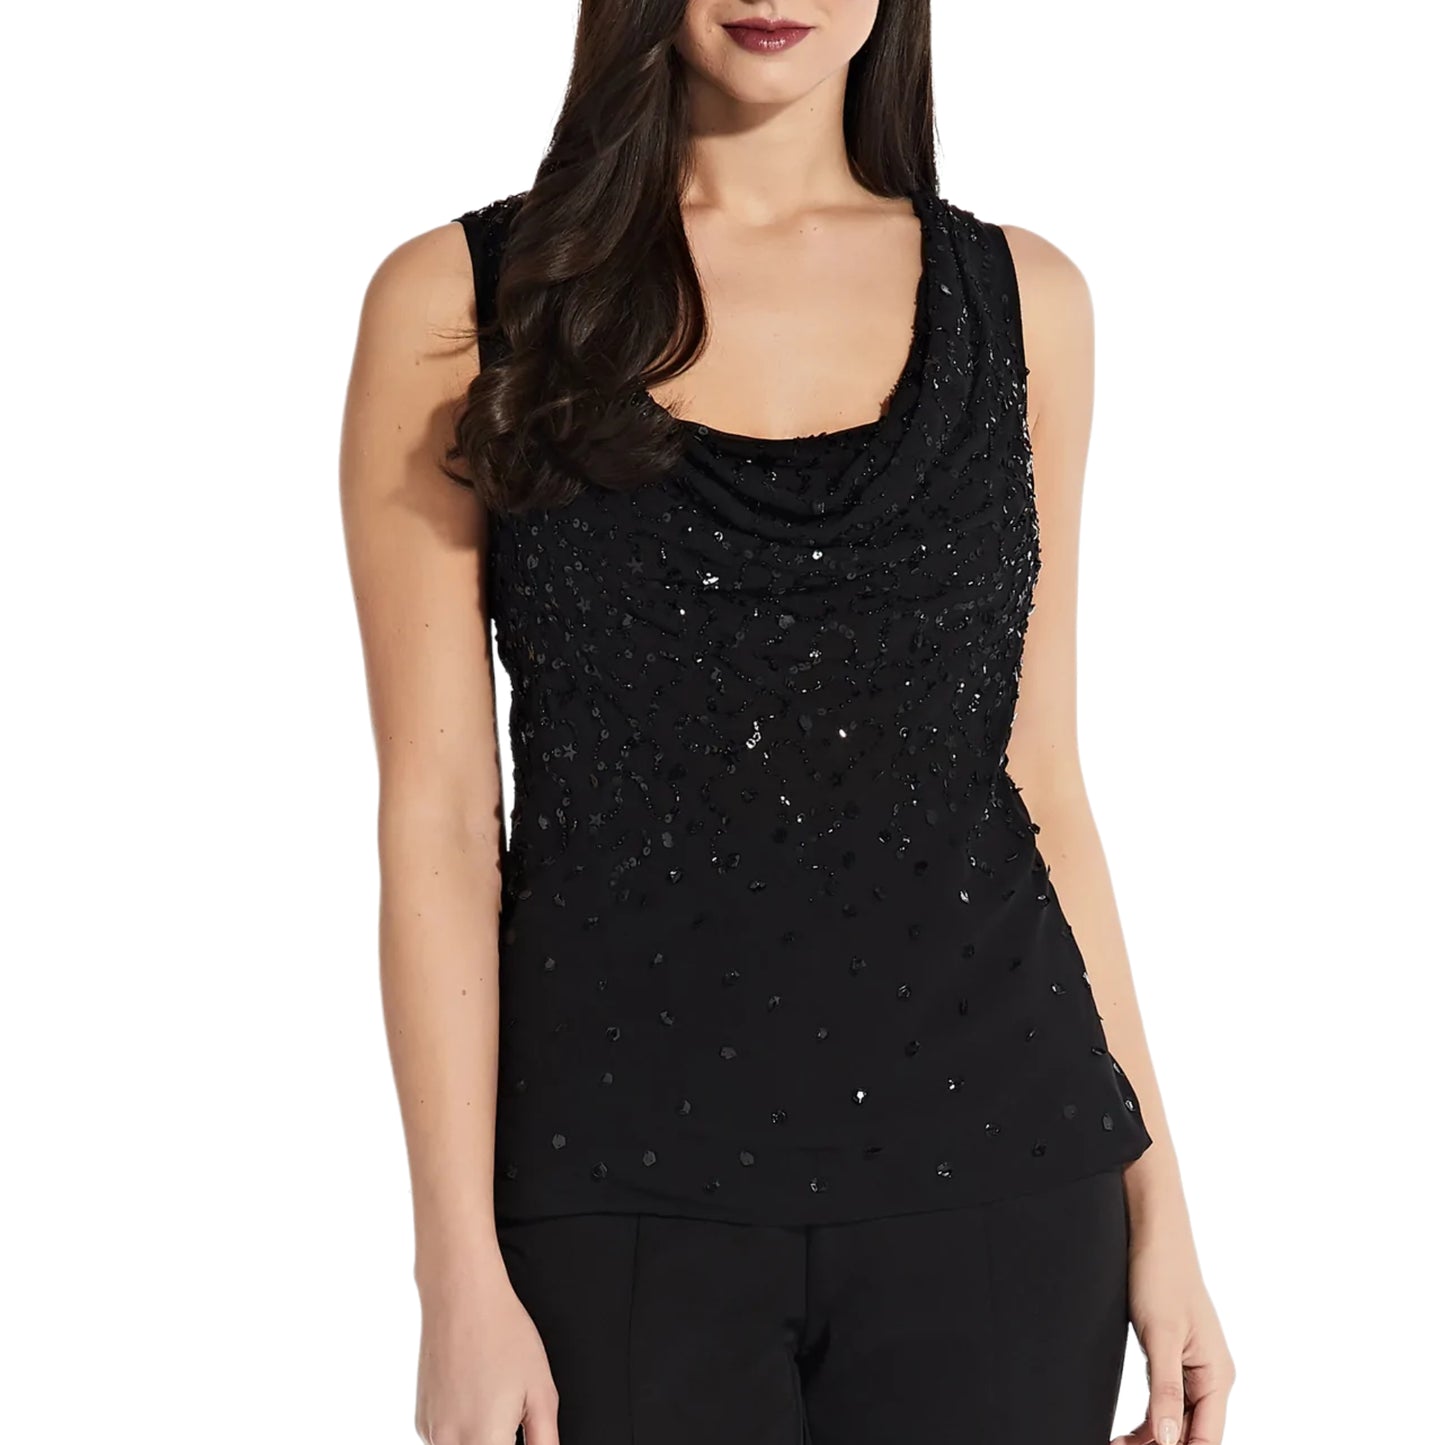 ADRIANNA PAPELL Women's Beaded Cowl Neck Top Party Blouse